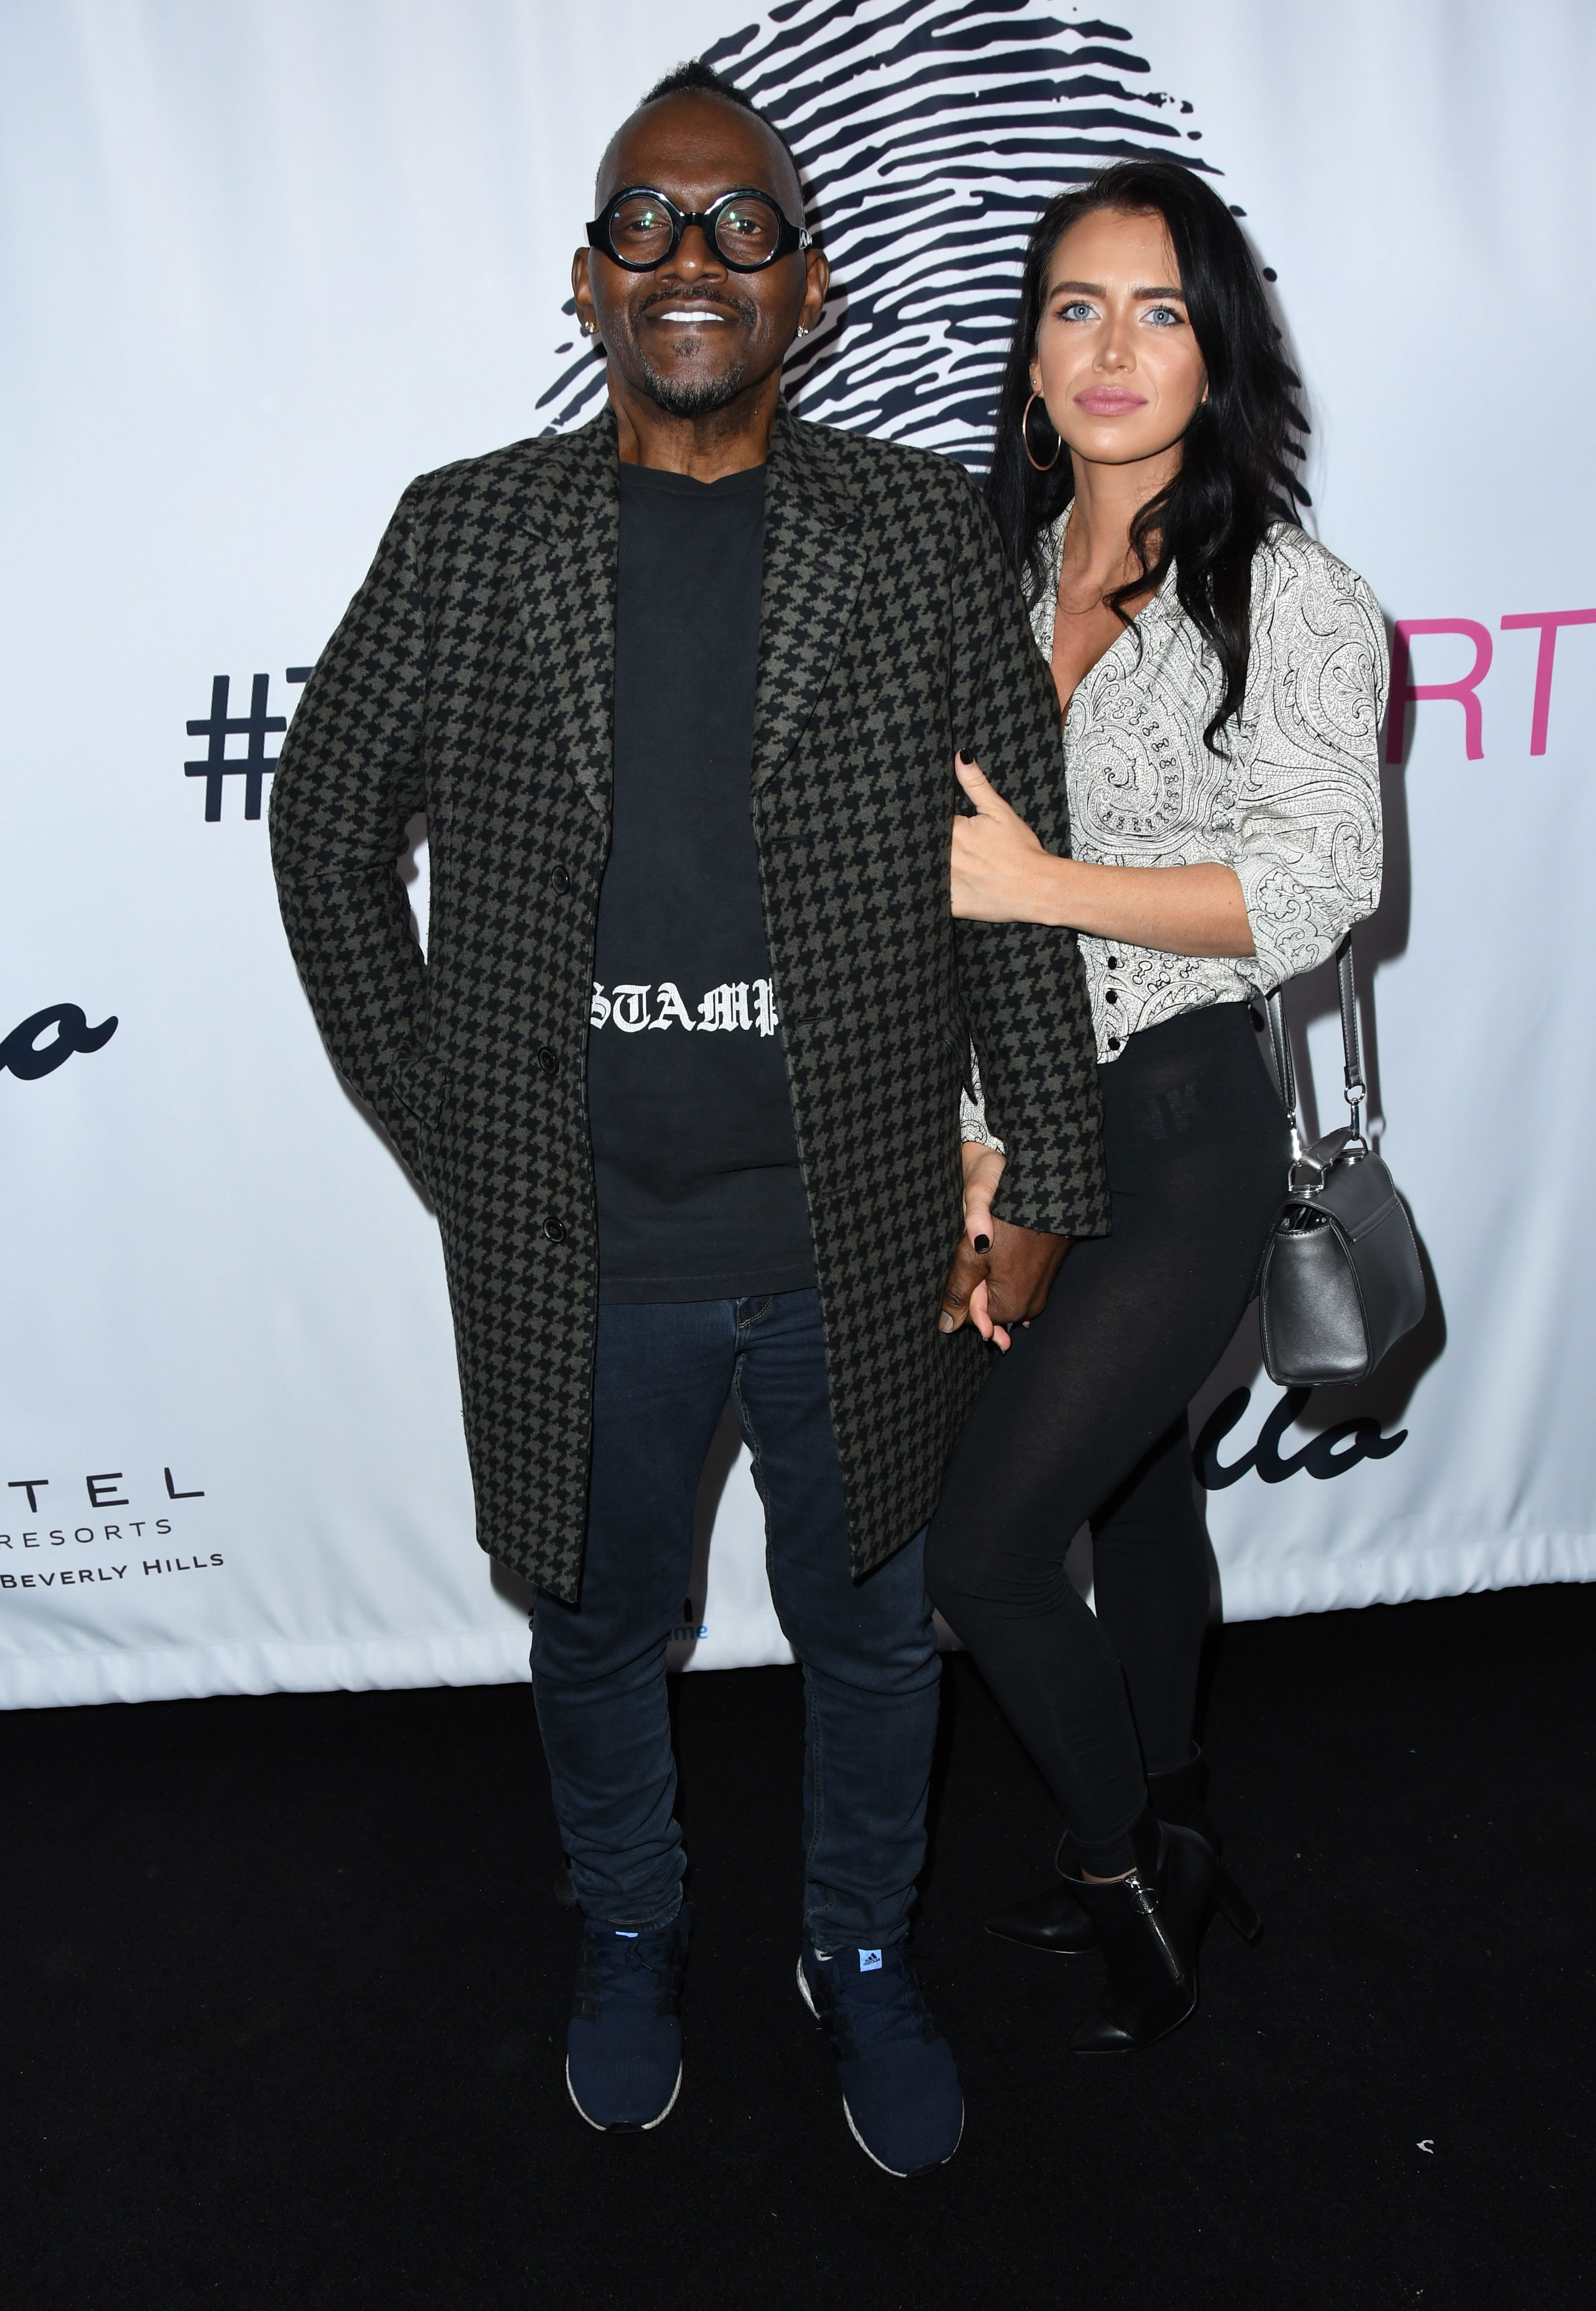 <p>There's a 35-year age difference between Randy Jackson and his musician girlfriend, Simone. But it doesn't faze this duo. You want perspective? She was born when George H.W. Bush was in the White House. Randy, however, was born when Dwight D. Eisenhower was commander in chief.</p>